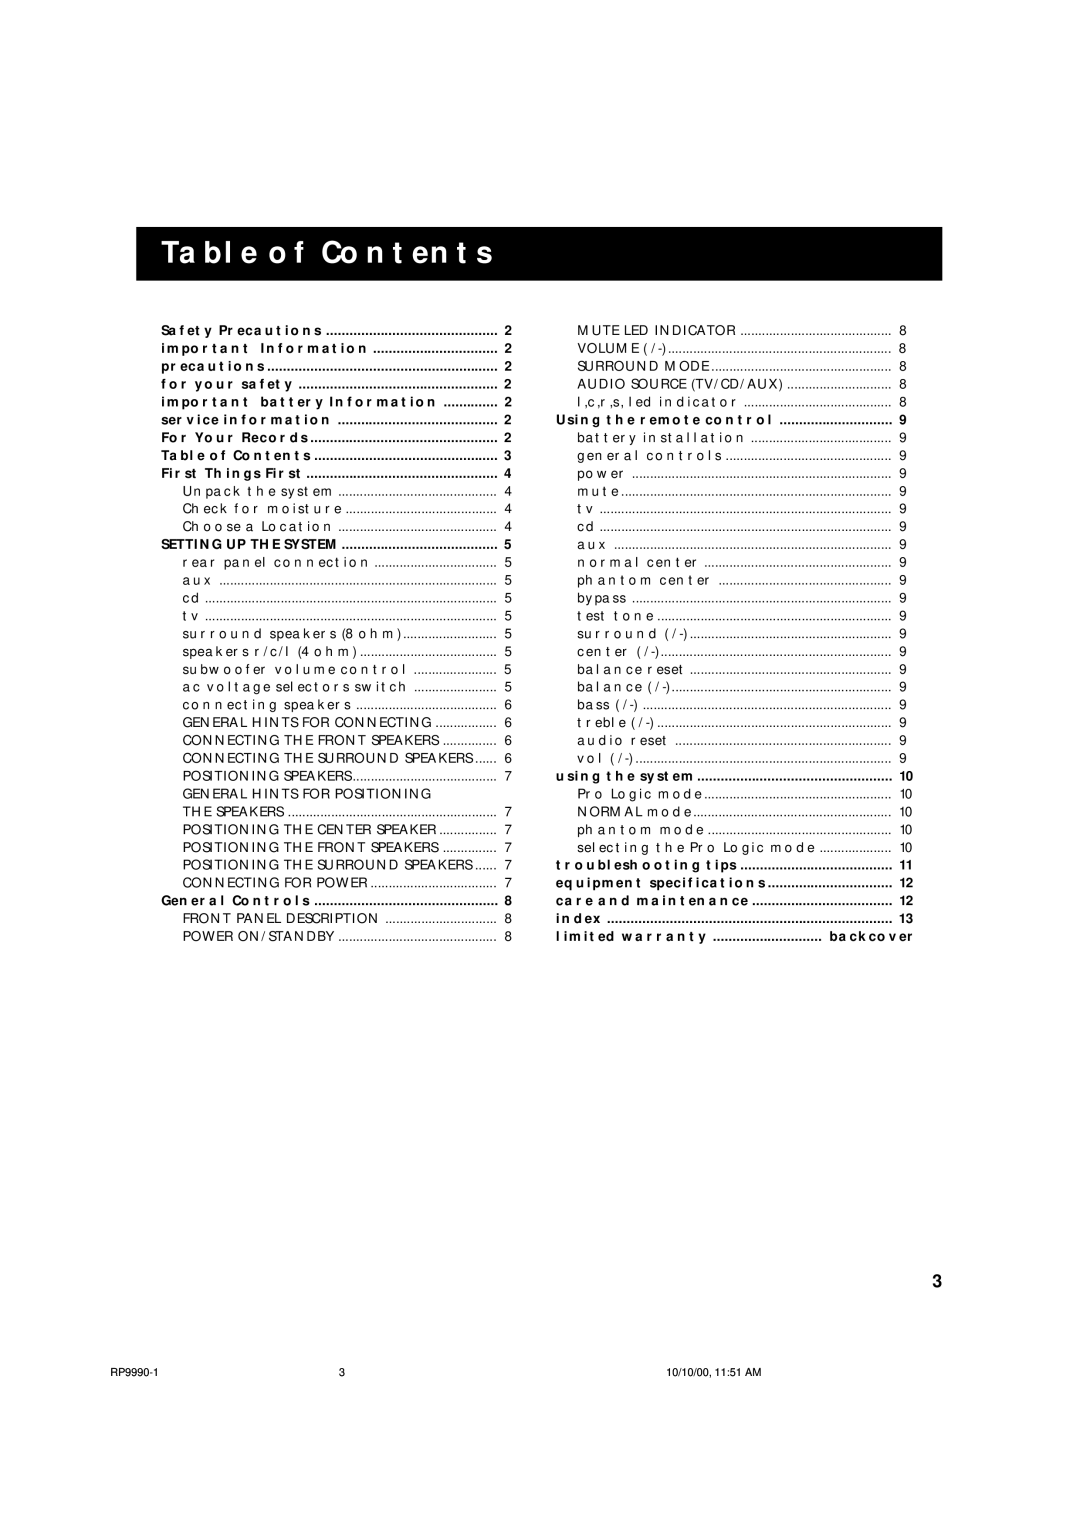 RCA RP-9990 manual Table Of Contents 